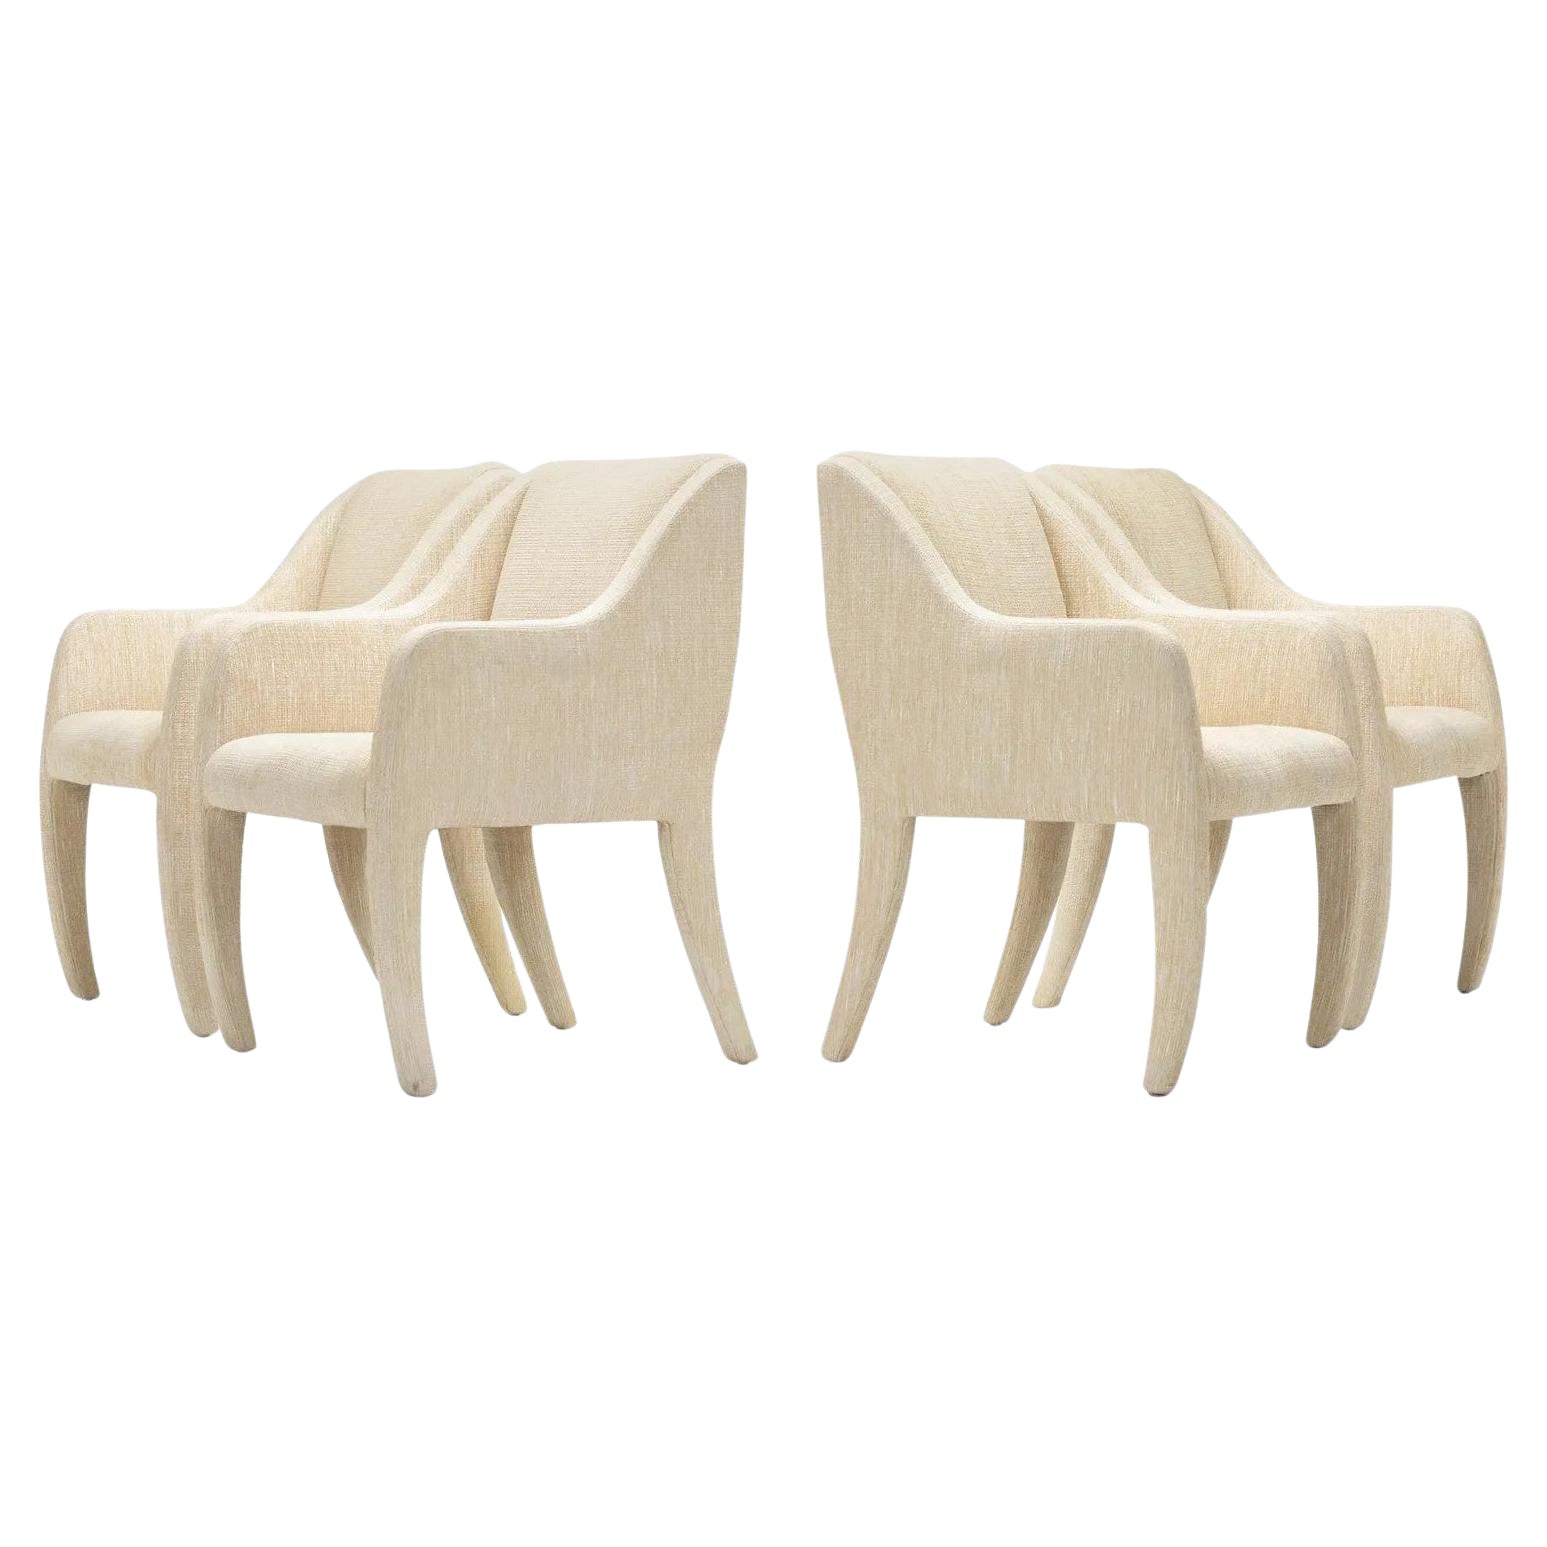 Four Sculptural Dining Chairs by Directional For Sale